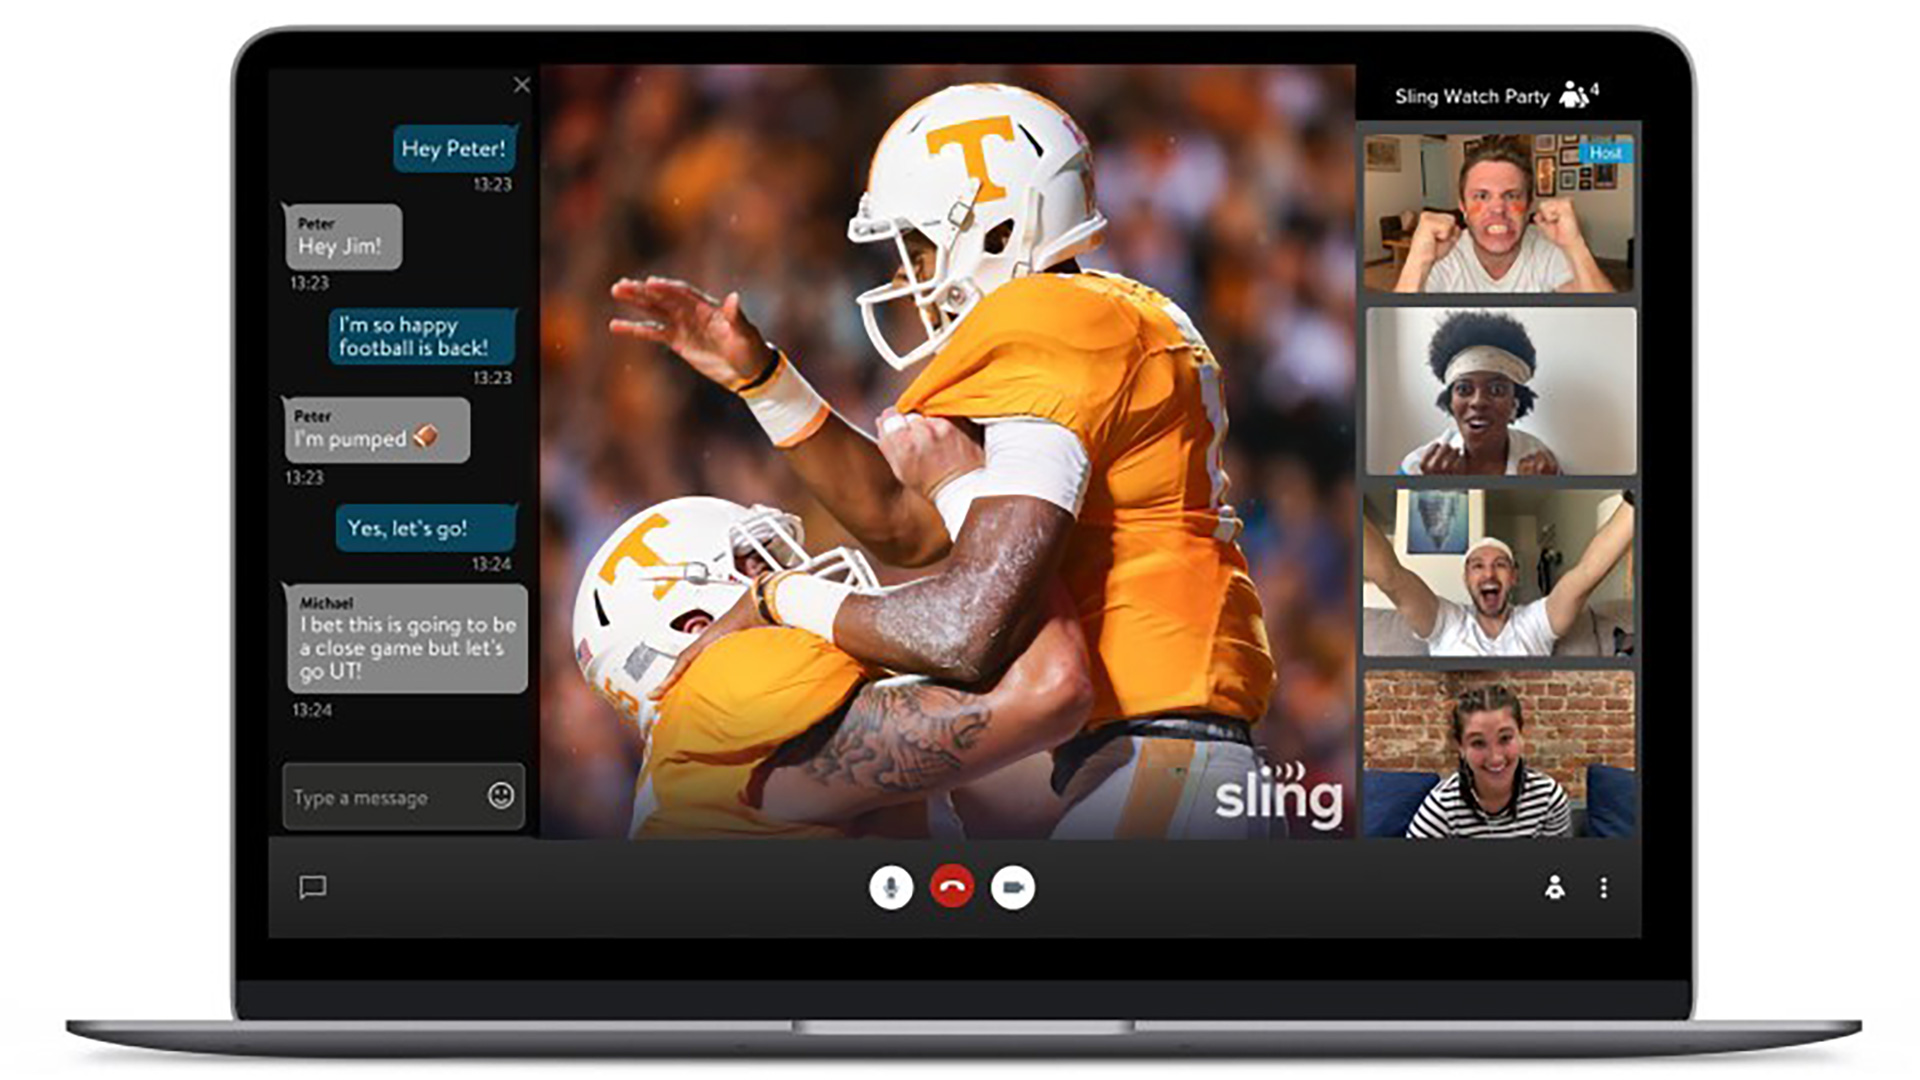 sling tv watch party video chat